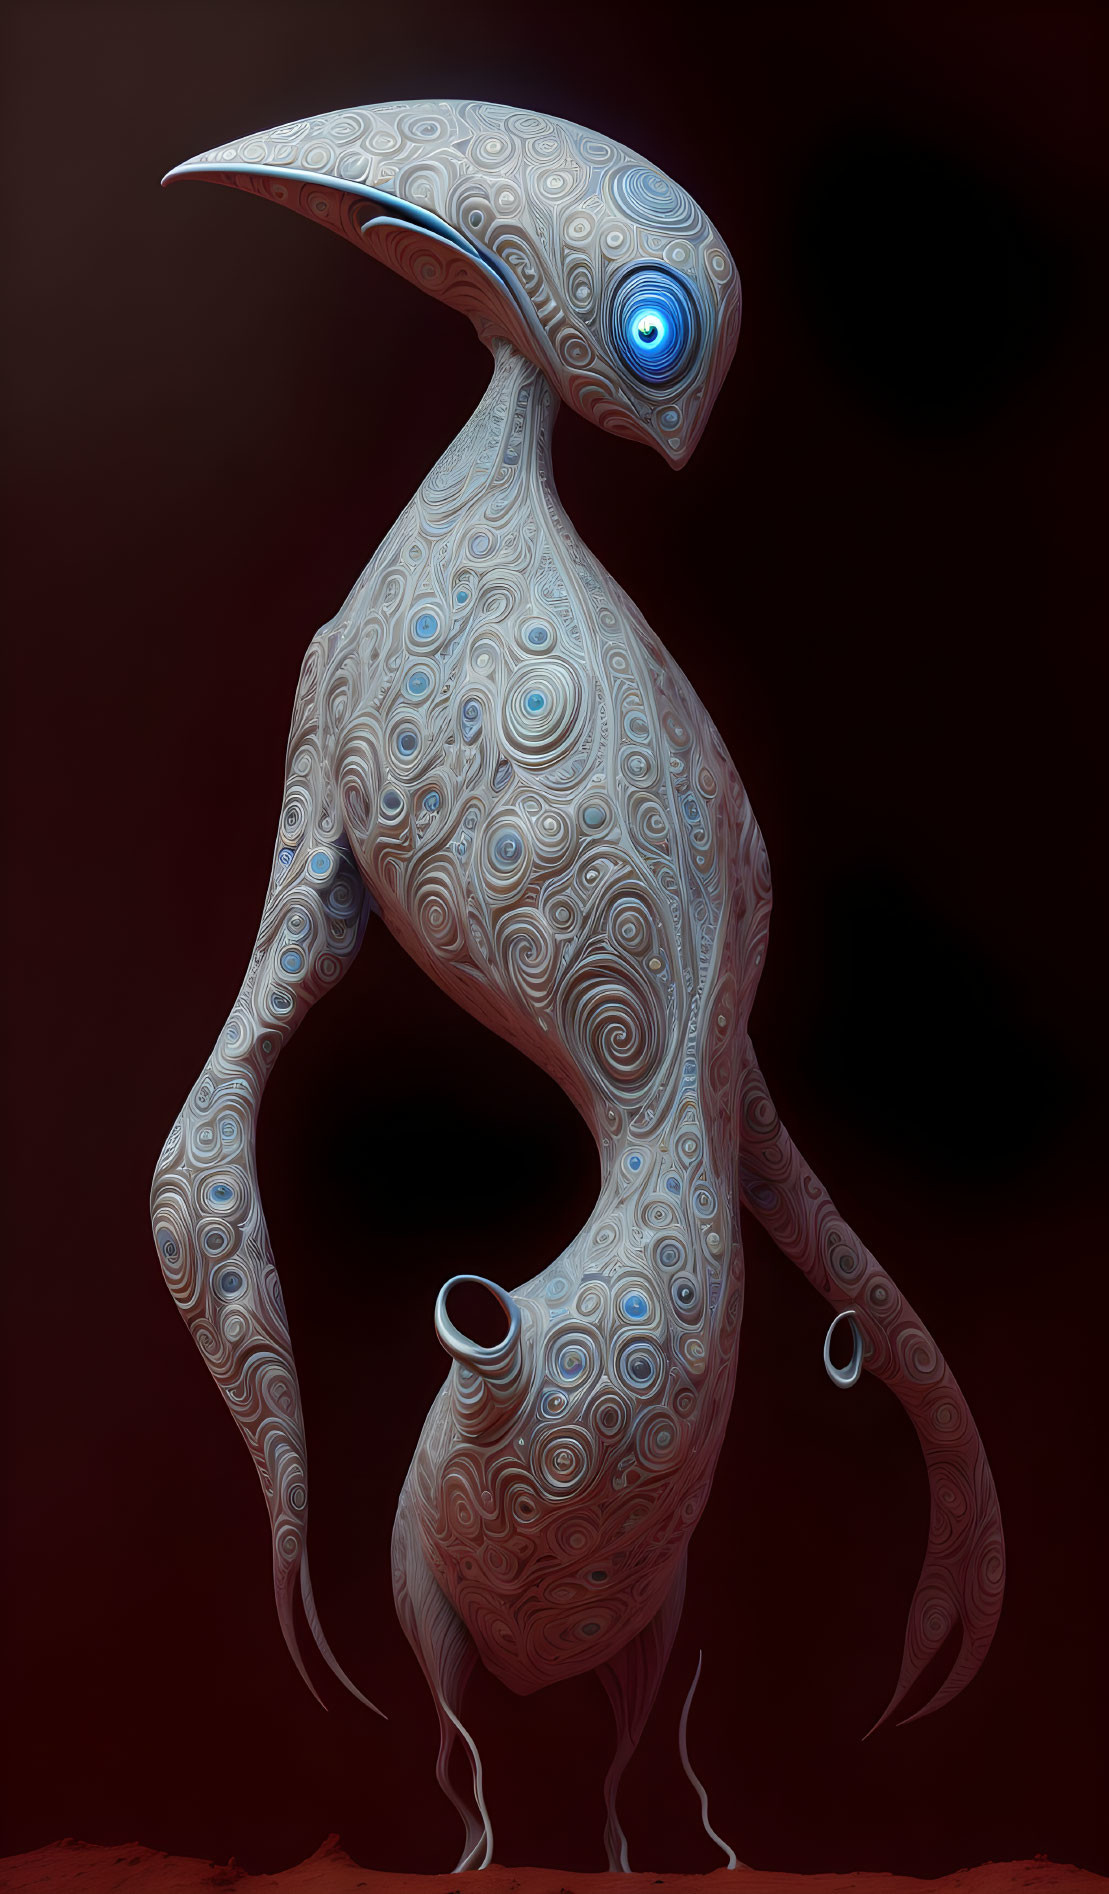 Unique Alien Creature with Long Curved Neck and Ornate Body on Dark Background